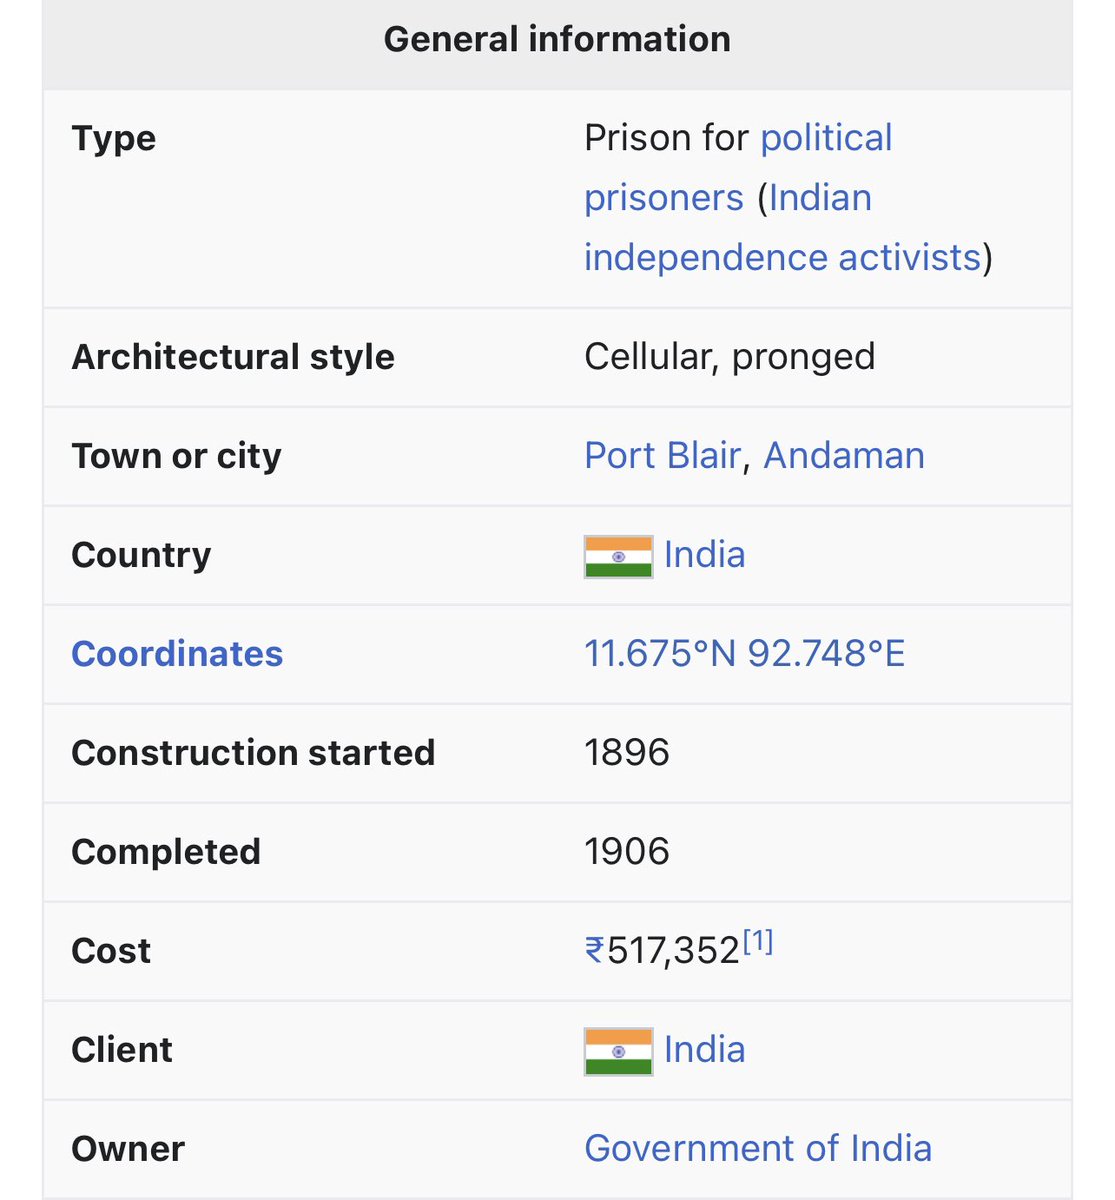 Hi @Javedakhtarjadu when you say your great great great grandfather died in Kala Pani, do you mean Kalapani, the village in Bhopal? Because the British started building the cellular jail in Andamans only in 1896, a full 32 years after your abbu ke abbu ke abbu ke abbu died!